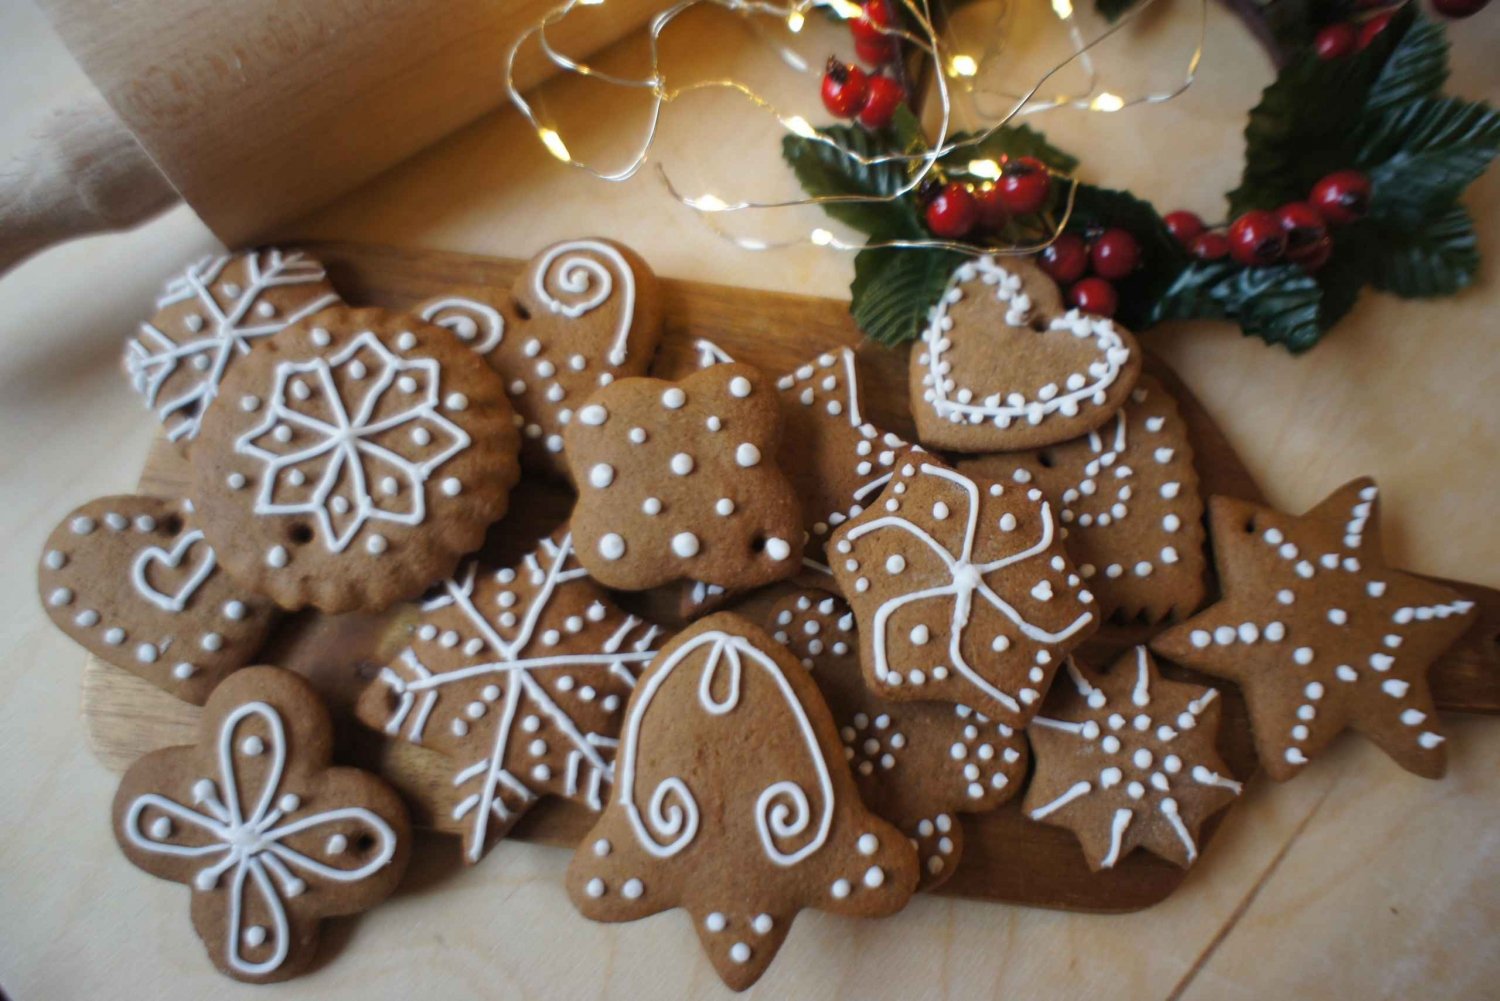 Gingerbread cookies baking and decorating class